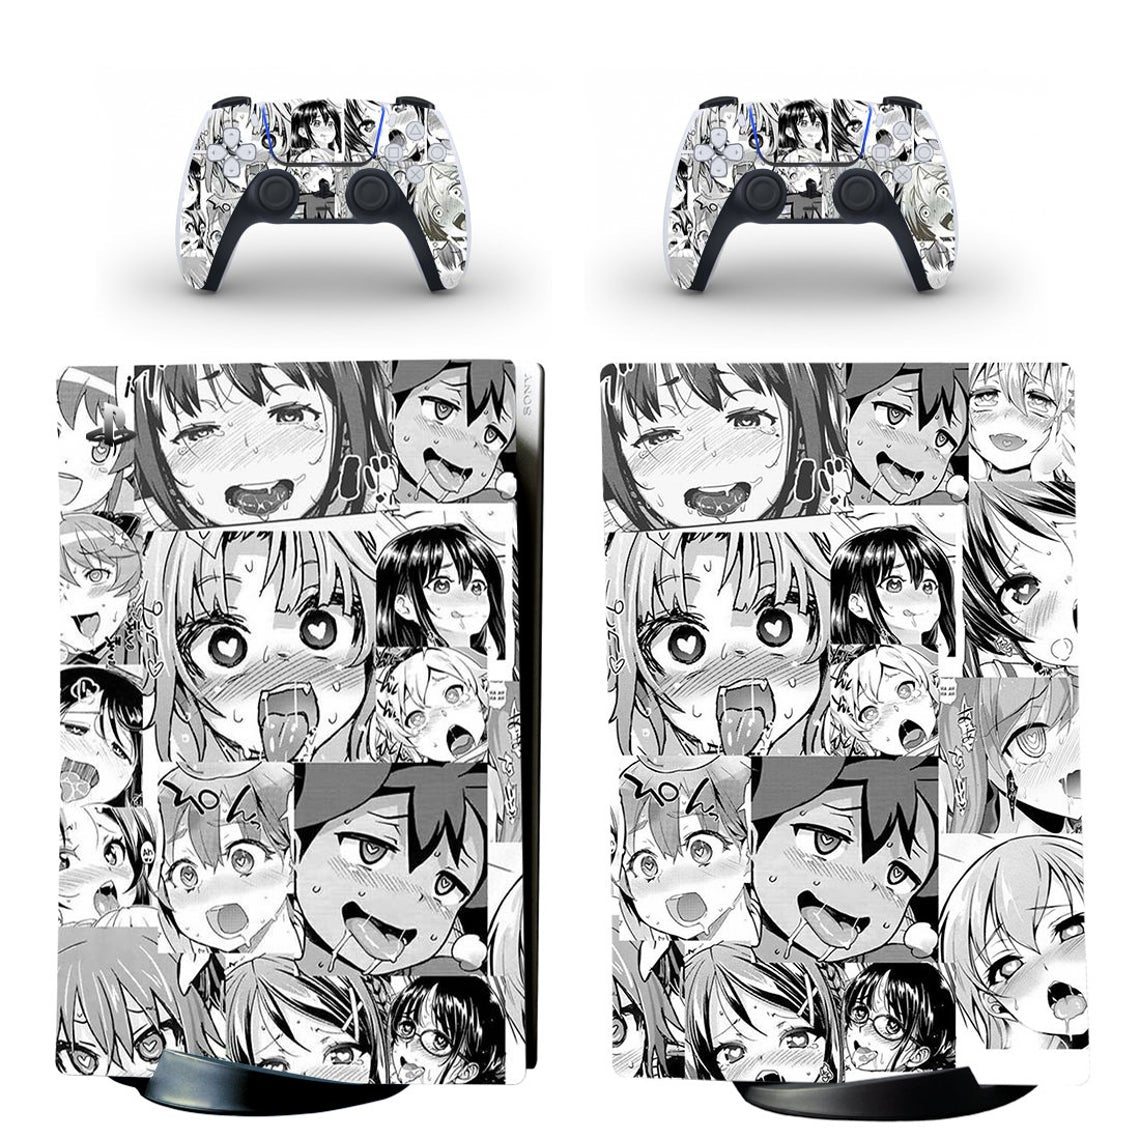 GAME Anime Customized PS5 Digital Skins Stickers For PS5 digita Controller  on OnBuy